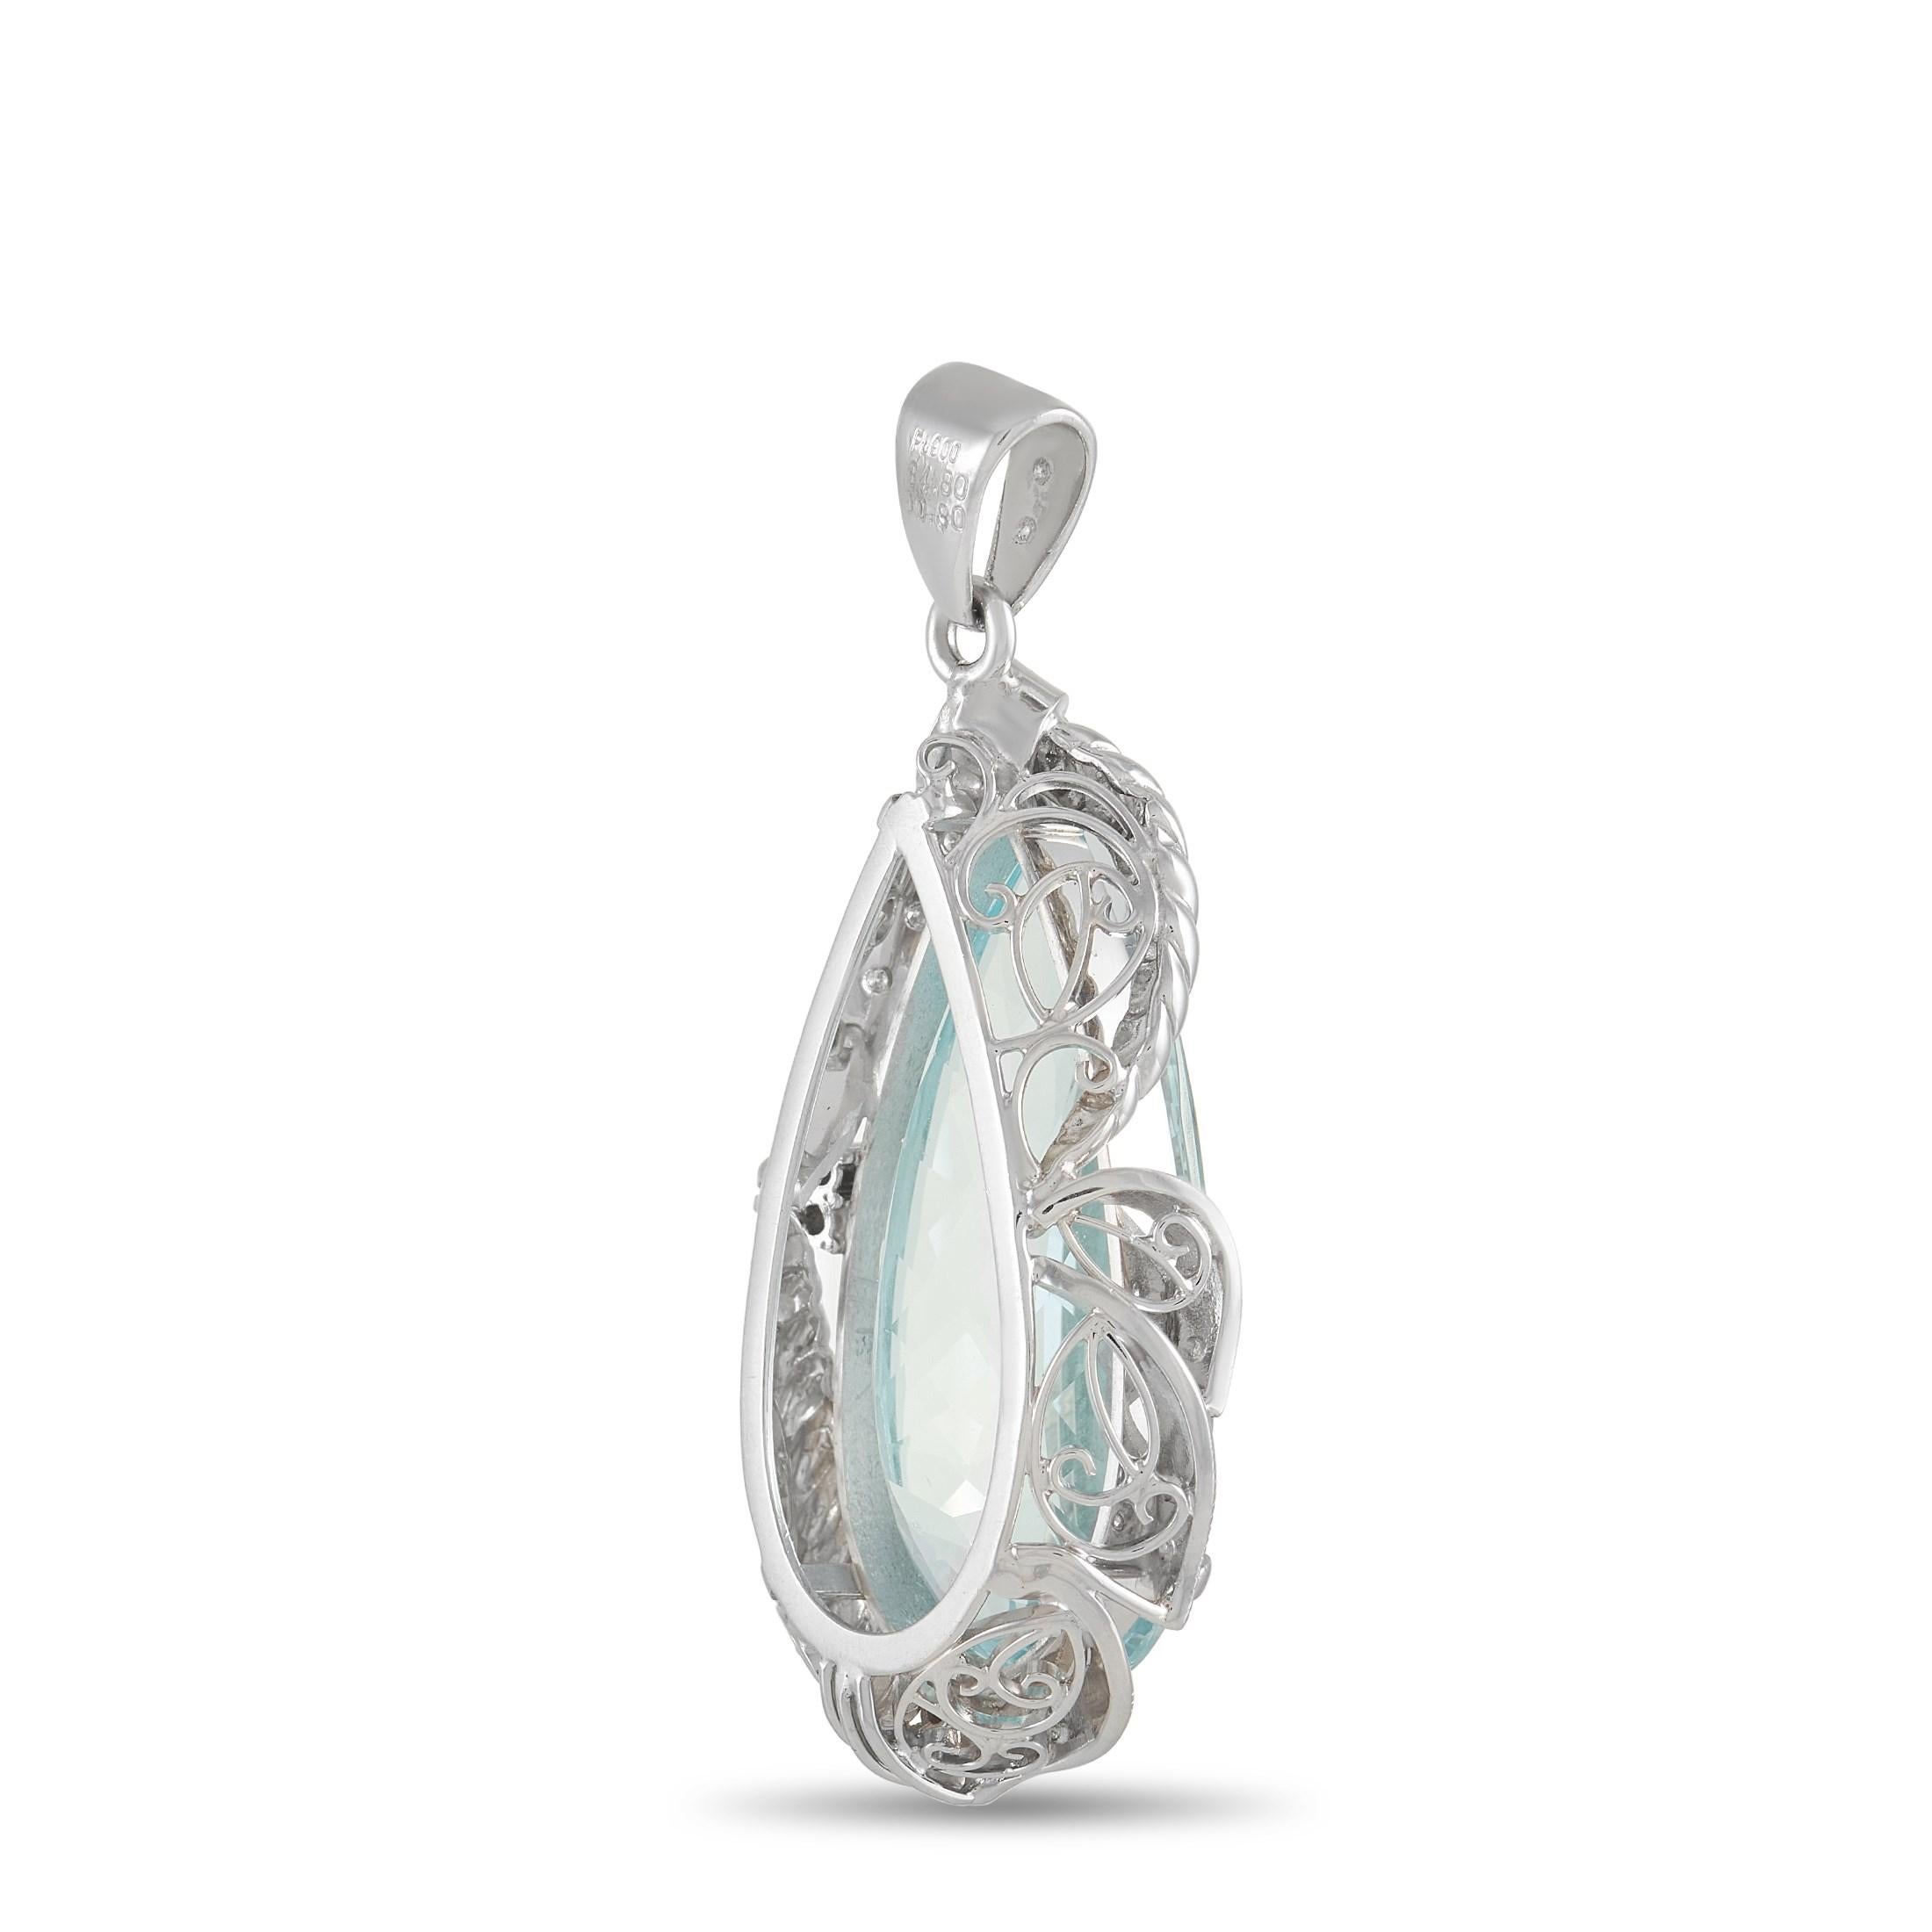 Luxurious and opulent in design, this incredible pendant is ready to serve as a breathtaking addition to any jewelry collection. At the center of this pendant - which measures .88” wide and 1.76” long - sits a captivating light blue 34.80 carat